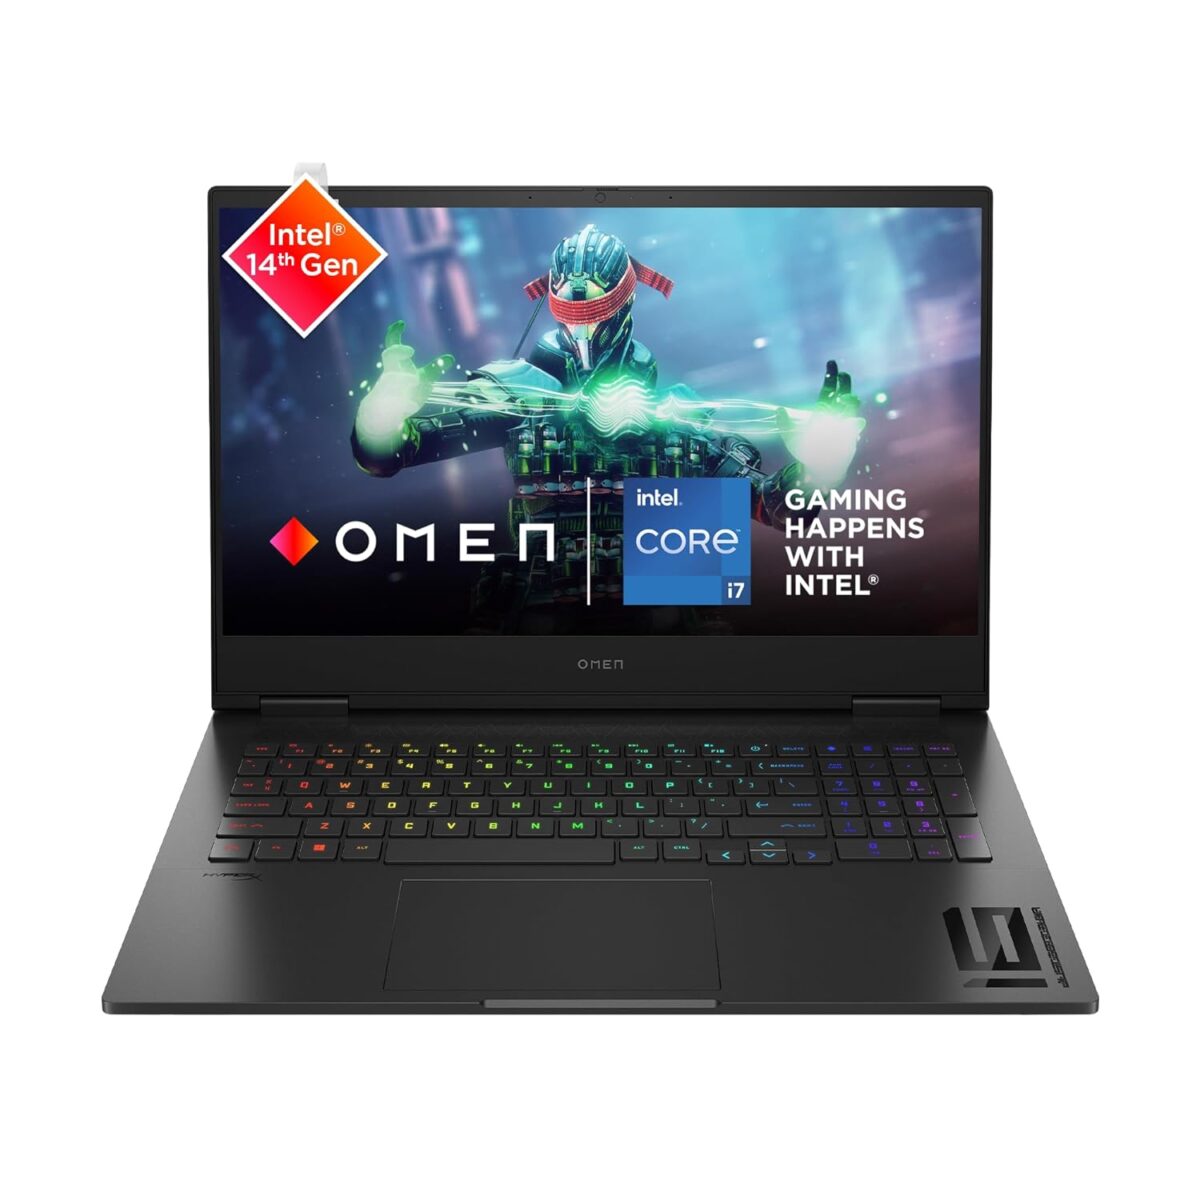 HP OMEN wf1025TX 2024 Gaming Laptop with 14th Gen Intel Core i7 processor launched in India | Check Price, Specs and Features